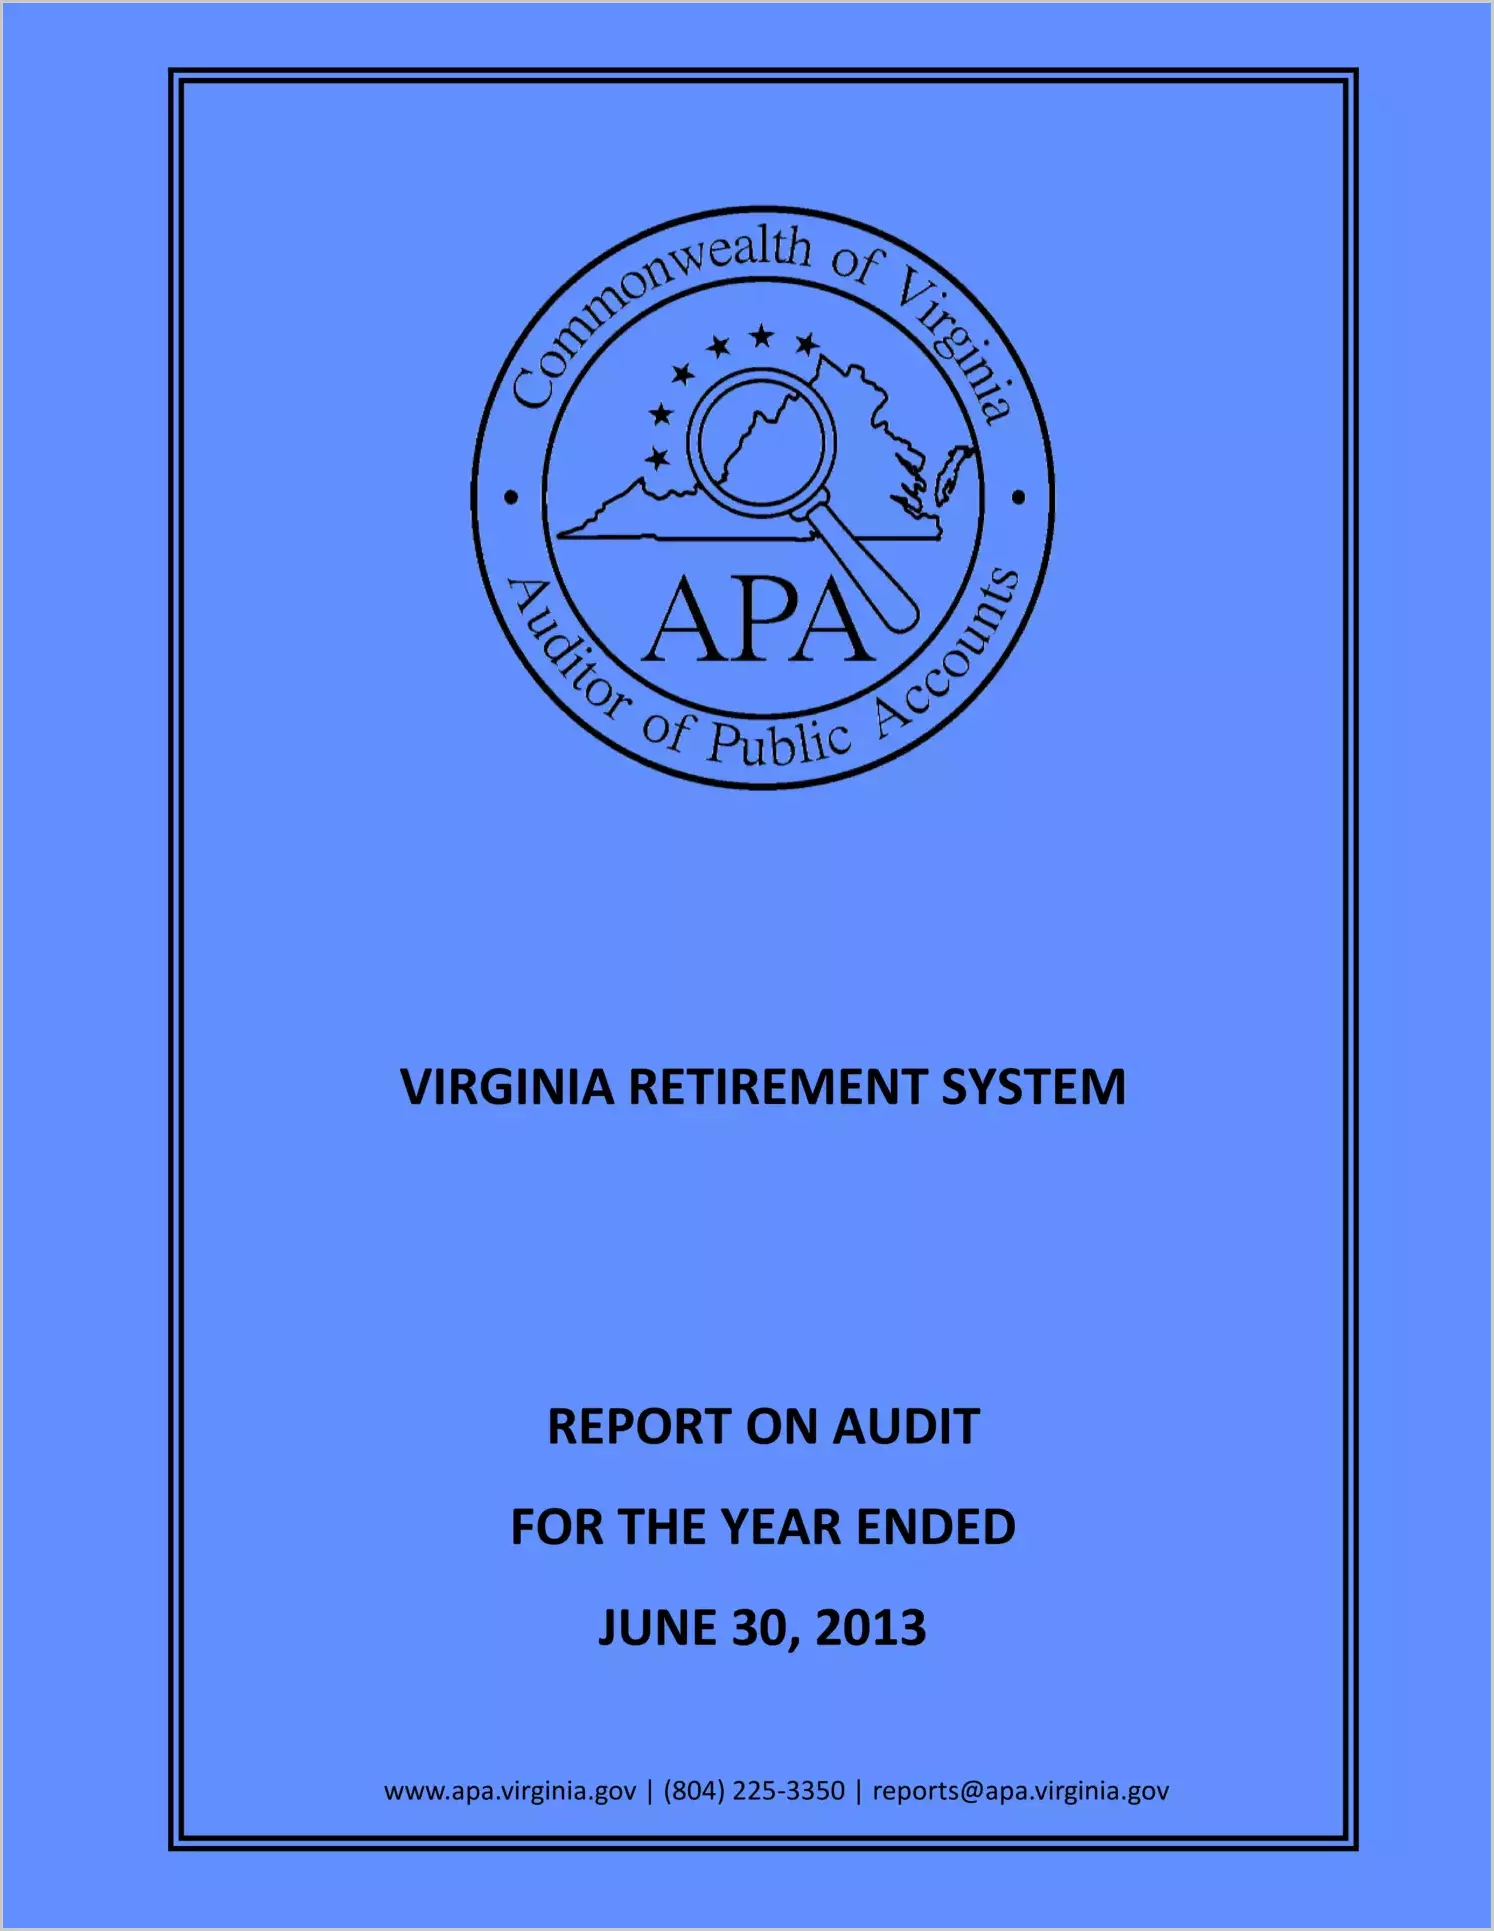 Virginia Retirement System for the year ended June 30, 2013